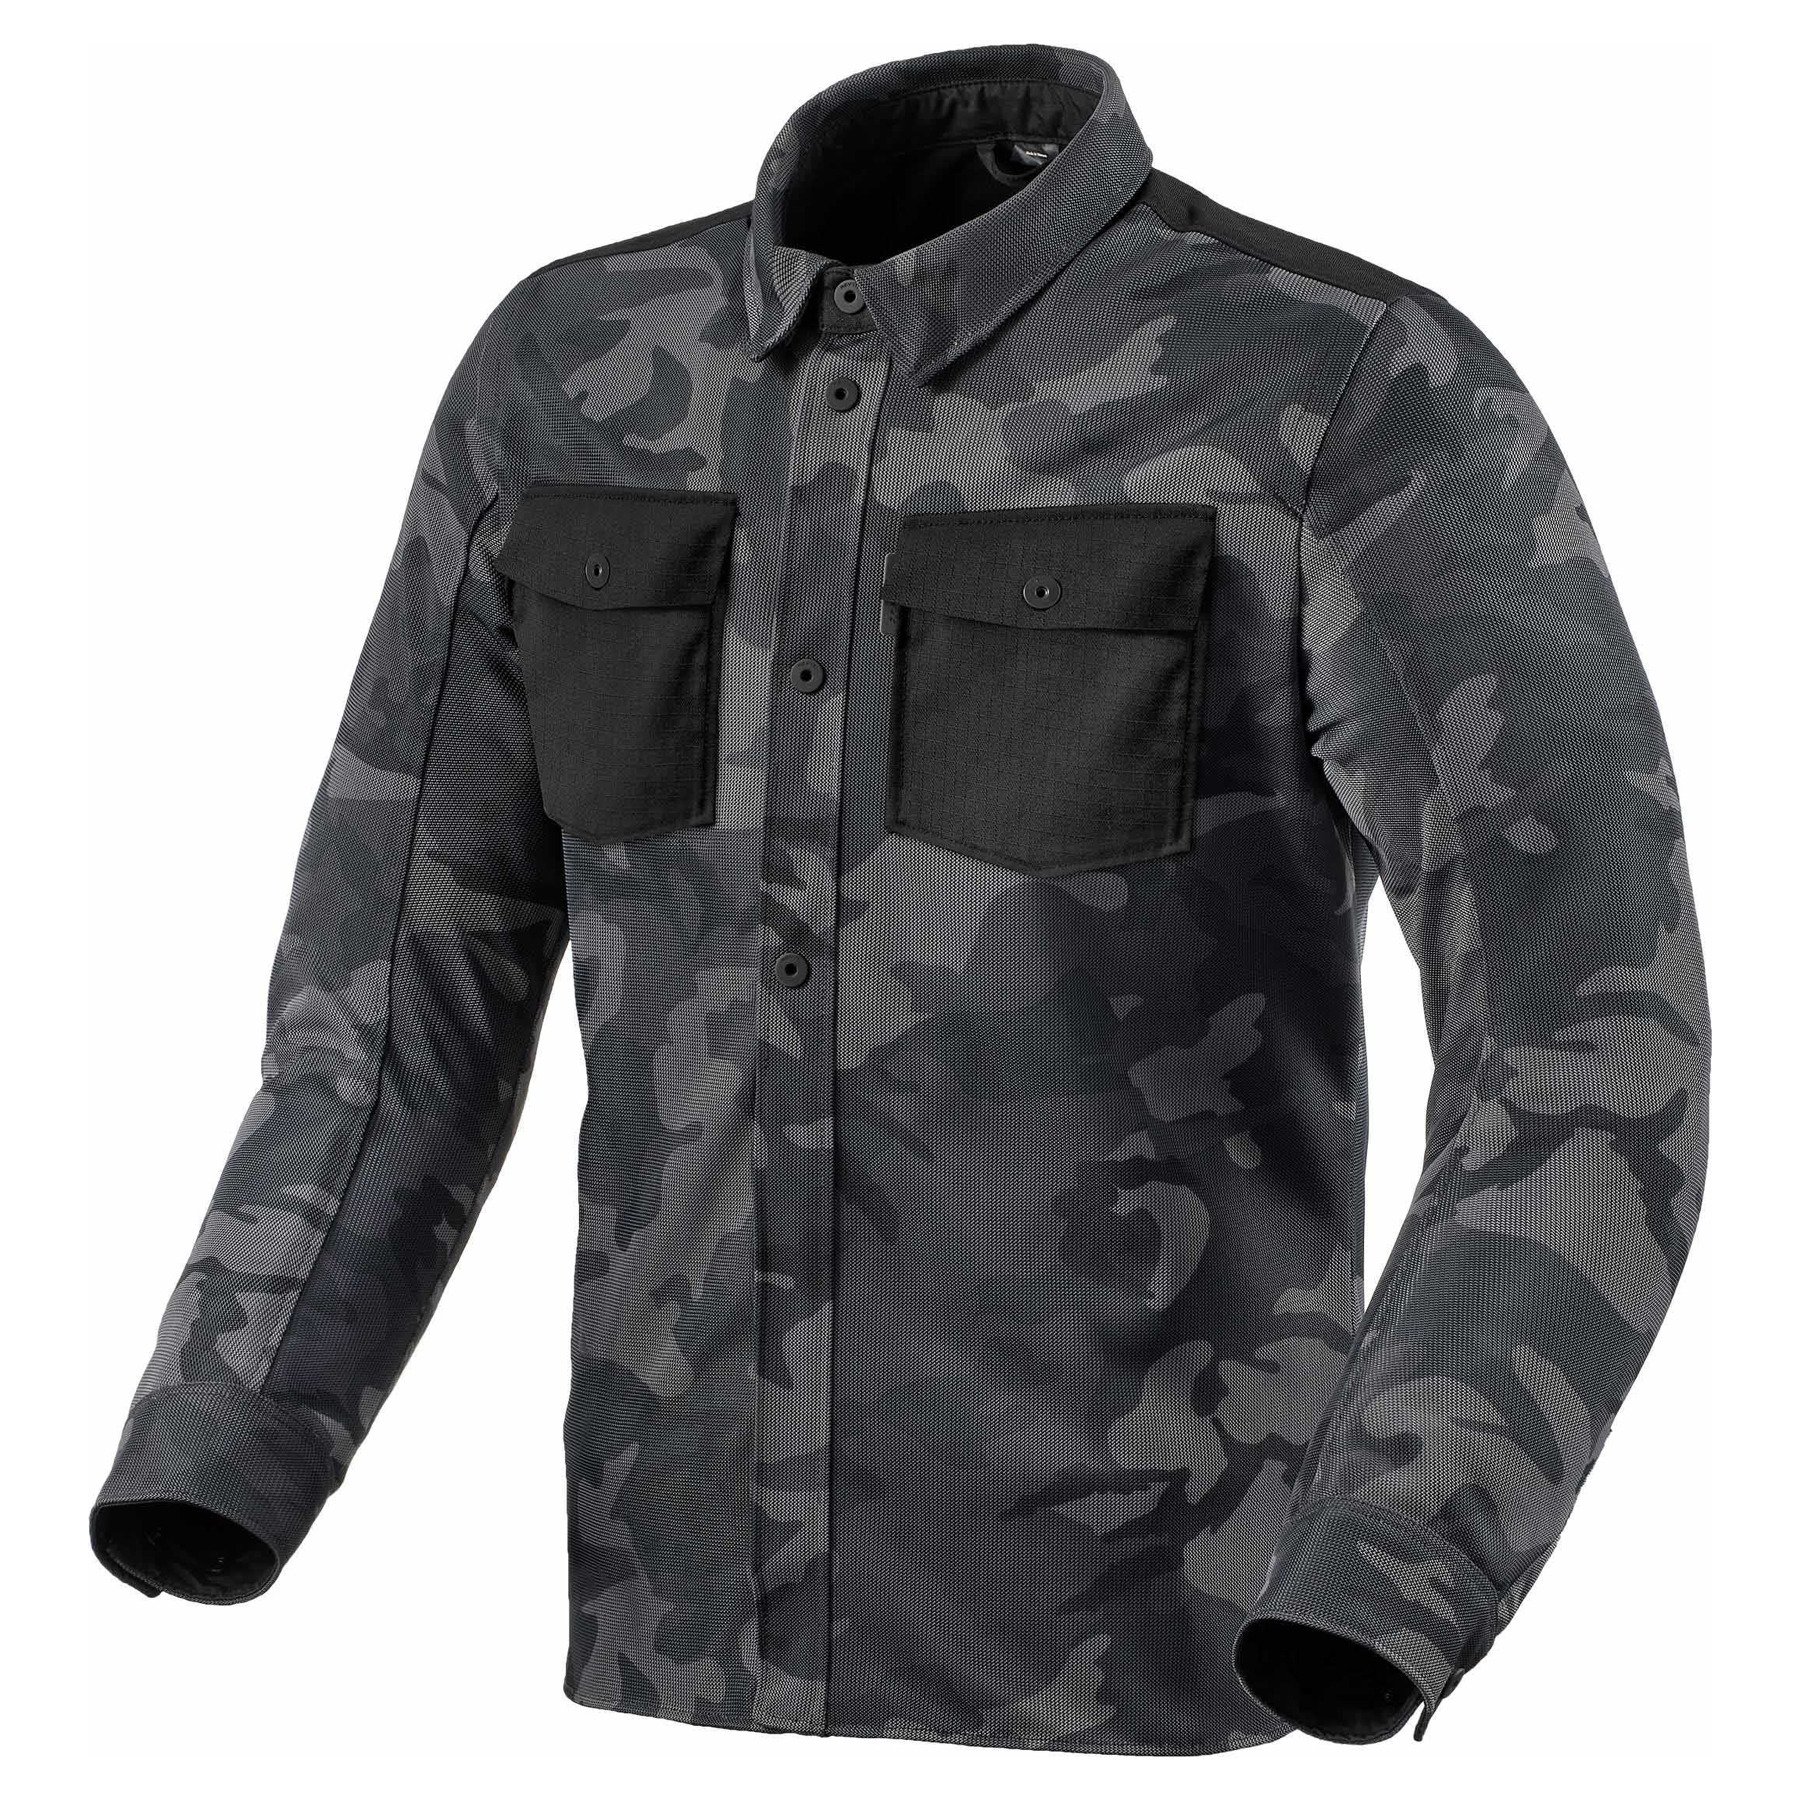 Image of REV'IT! Overshirt Tracer Air 2 Camo Dark Gris Blouson Taille M